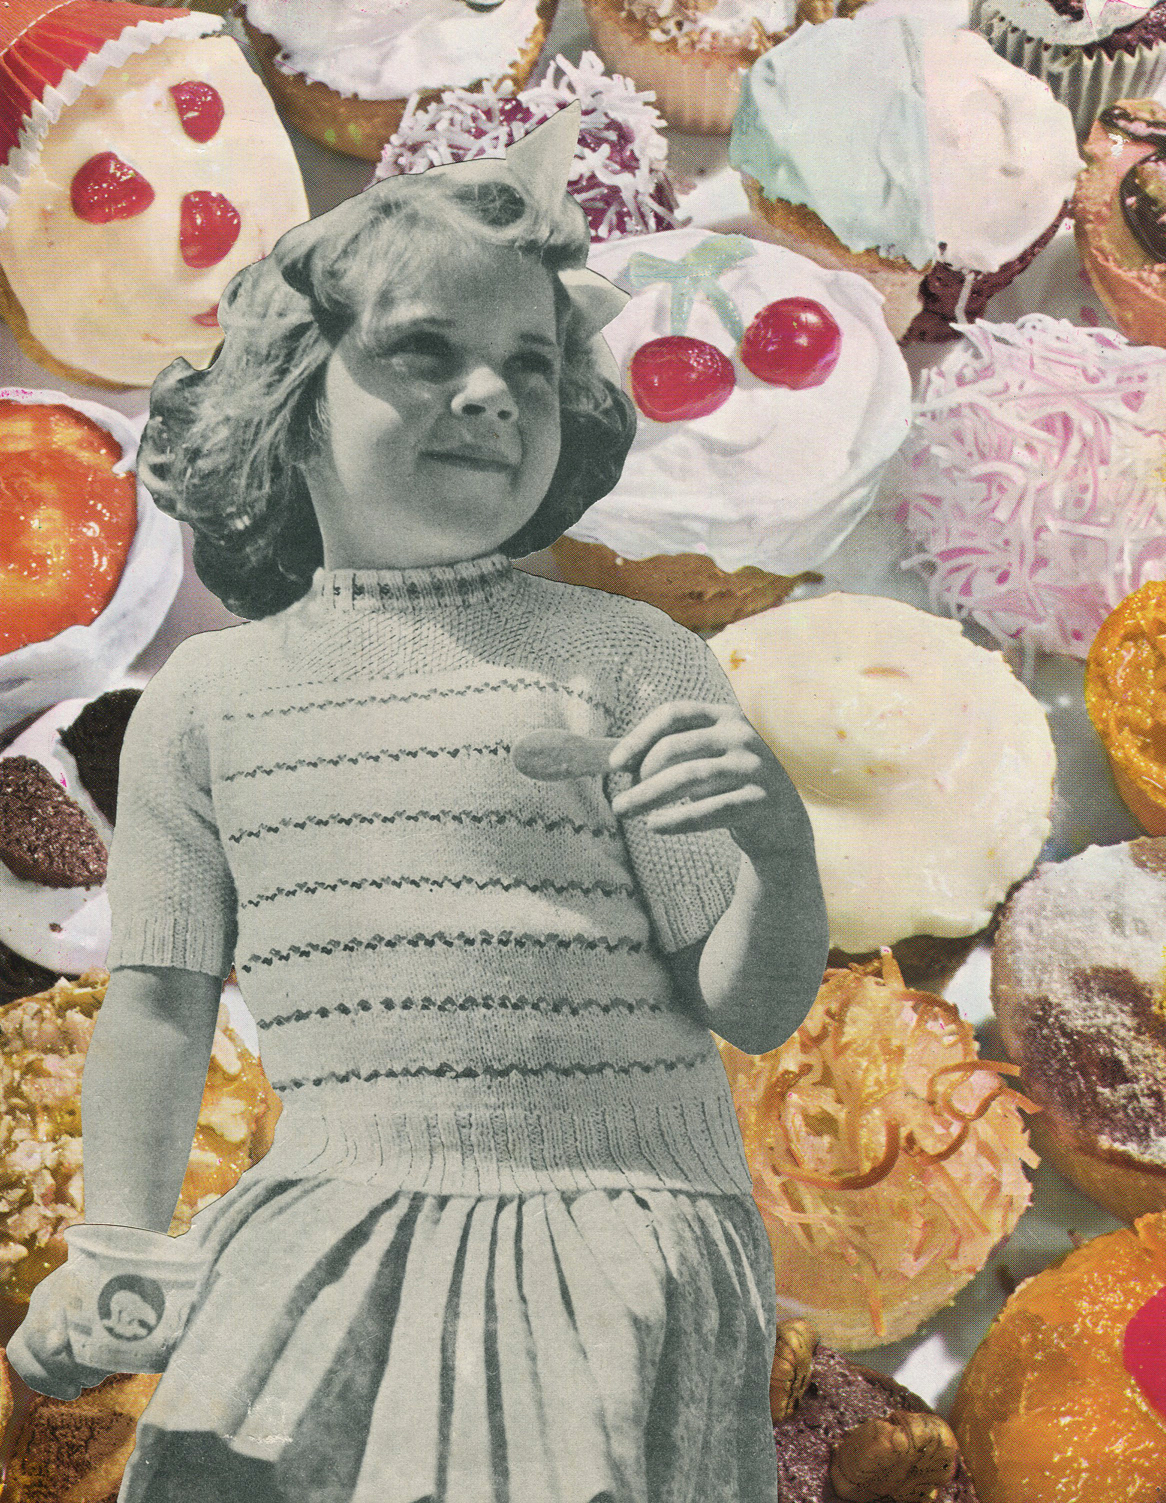 Trim With Coloured Sugar #4, 2015, collage, found paper